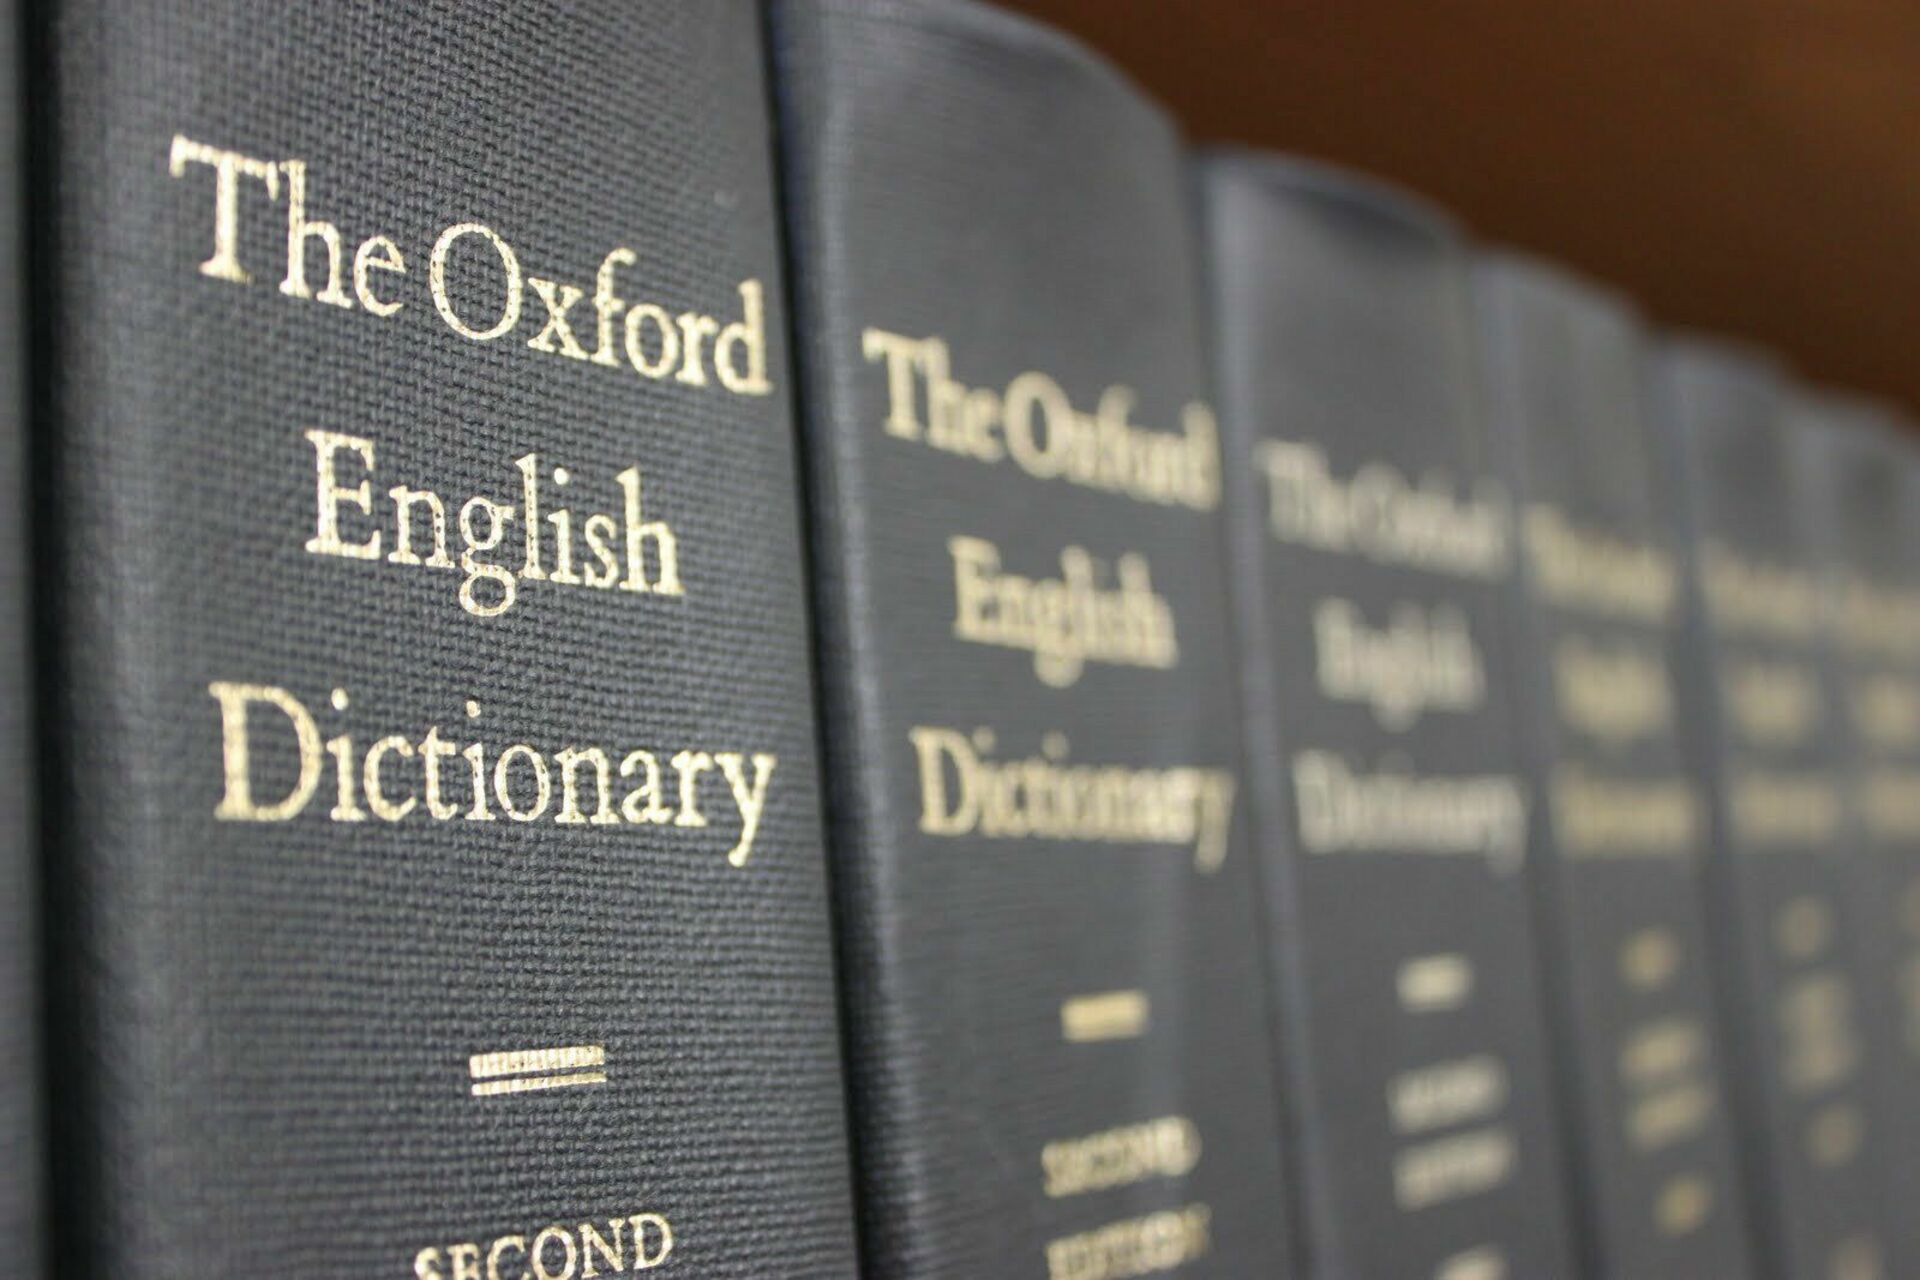 The new english dictionary. Оксфордский словарь. Оксфордский словарь английского. Английский словарь Оксфорд. Оксфордский словарь английского языка.